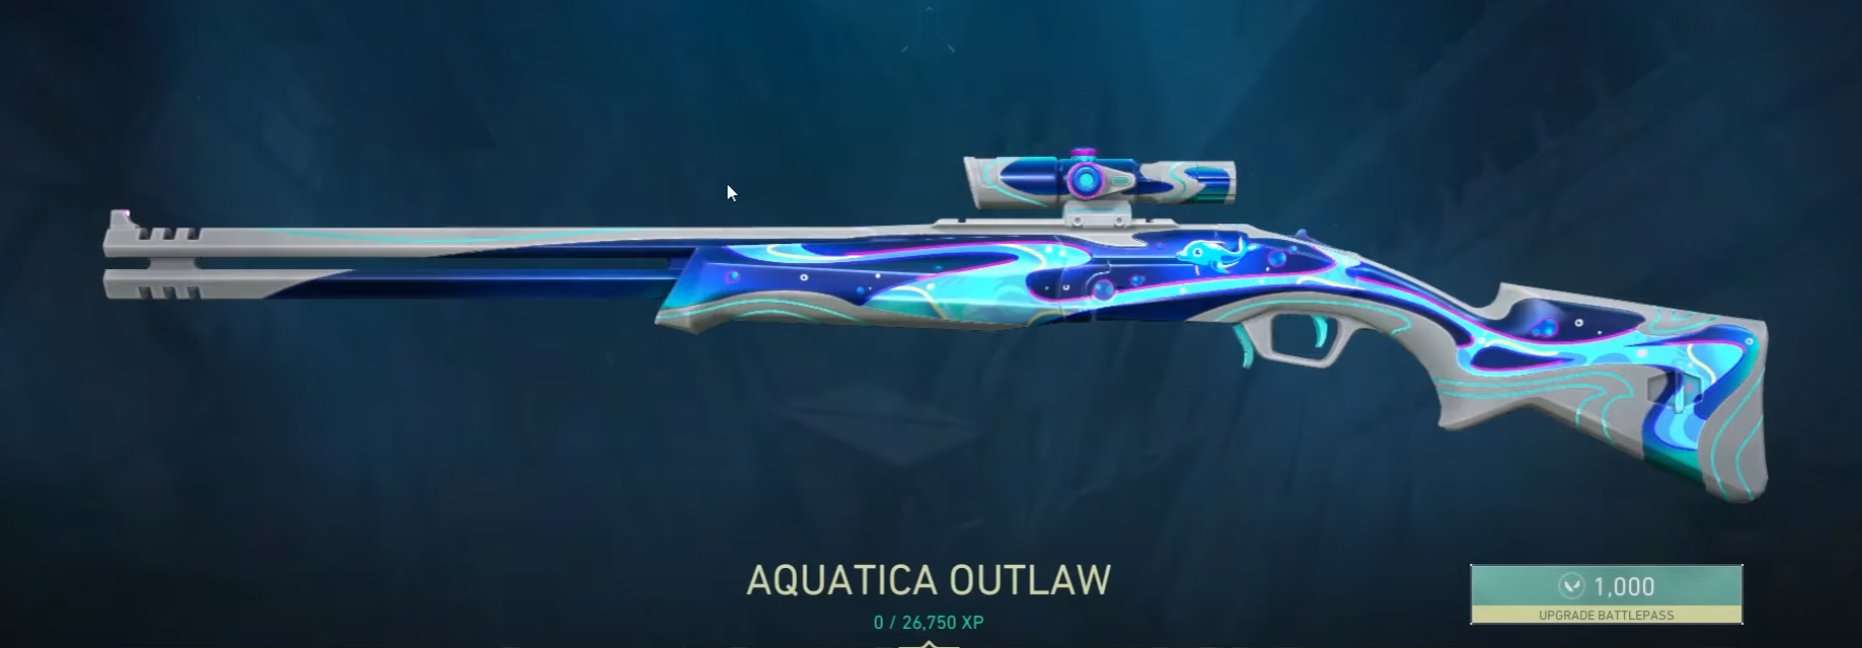 The Aquatica Outlaw, the first Battlepass Outlaw skin! Source: Riot Games and @ValorantUpdated on Twitter.com